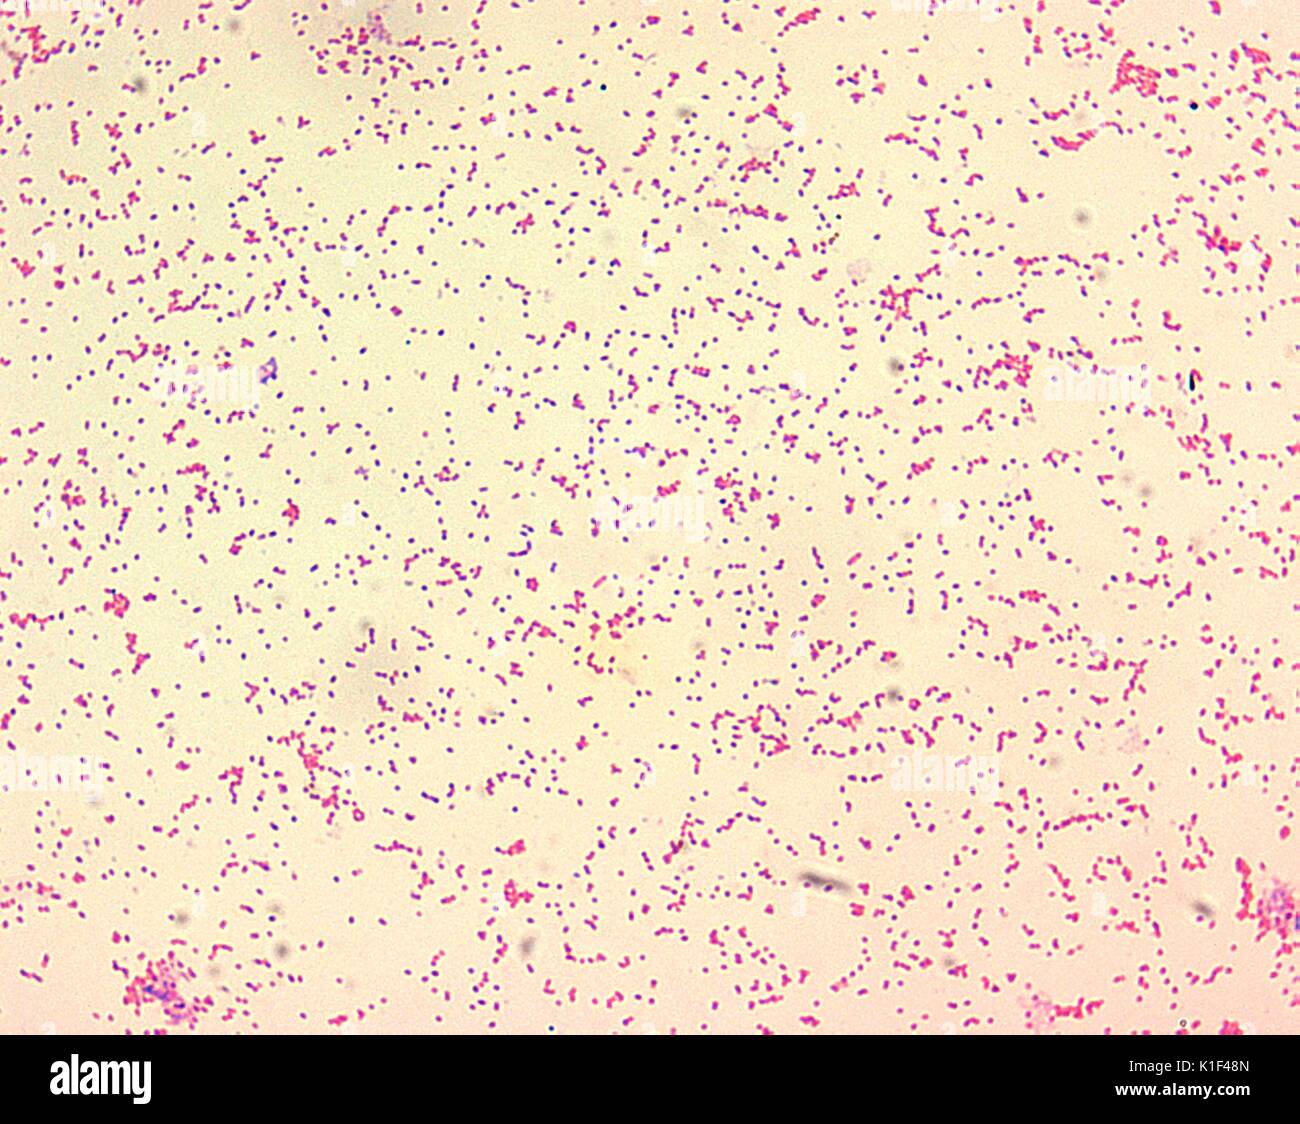 Brucella spp. are gram-negative in their staining morphology. Brucella spp. are poorly staining, small gram-negative coccobacilli (0.5-0.7 x 0.6-1.5 {micro}m), and are seen mostly as single cells and appearing like ?fine sand?. Image courtesy CDC/Courtesy of Larry Stauffer, Oregon State Public Health Laboratory, 2002. Stock Photo